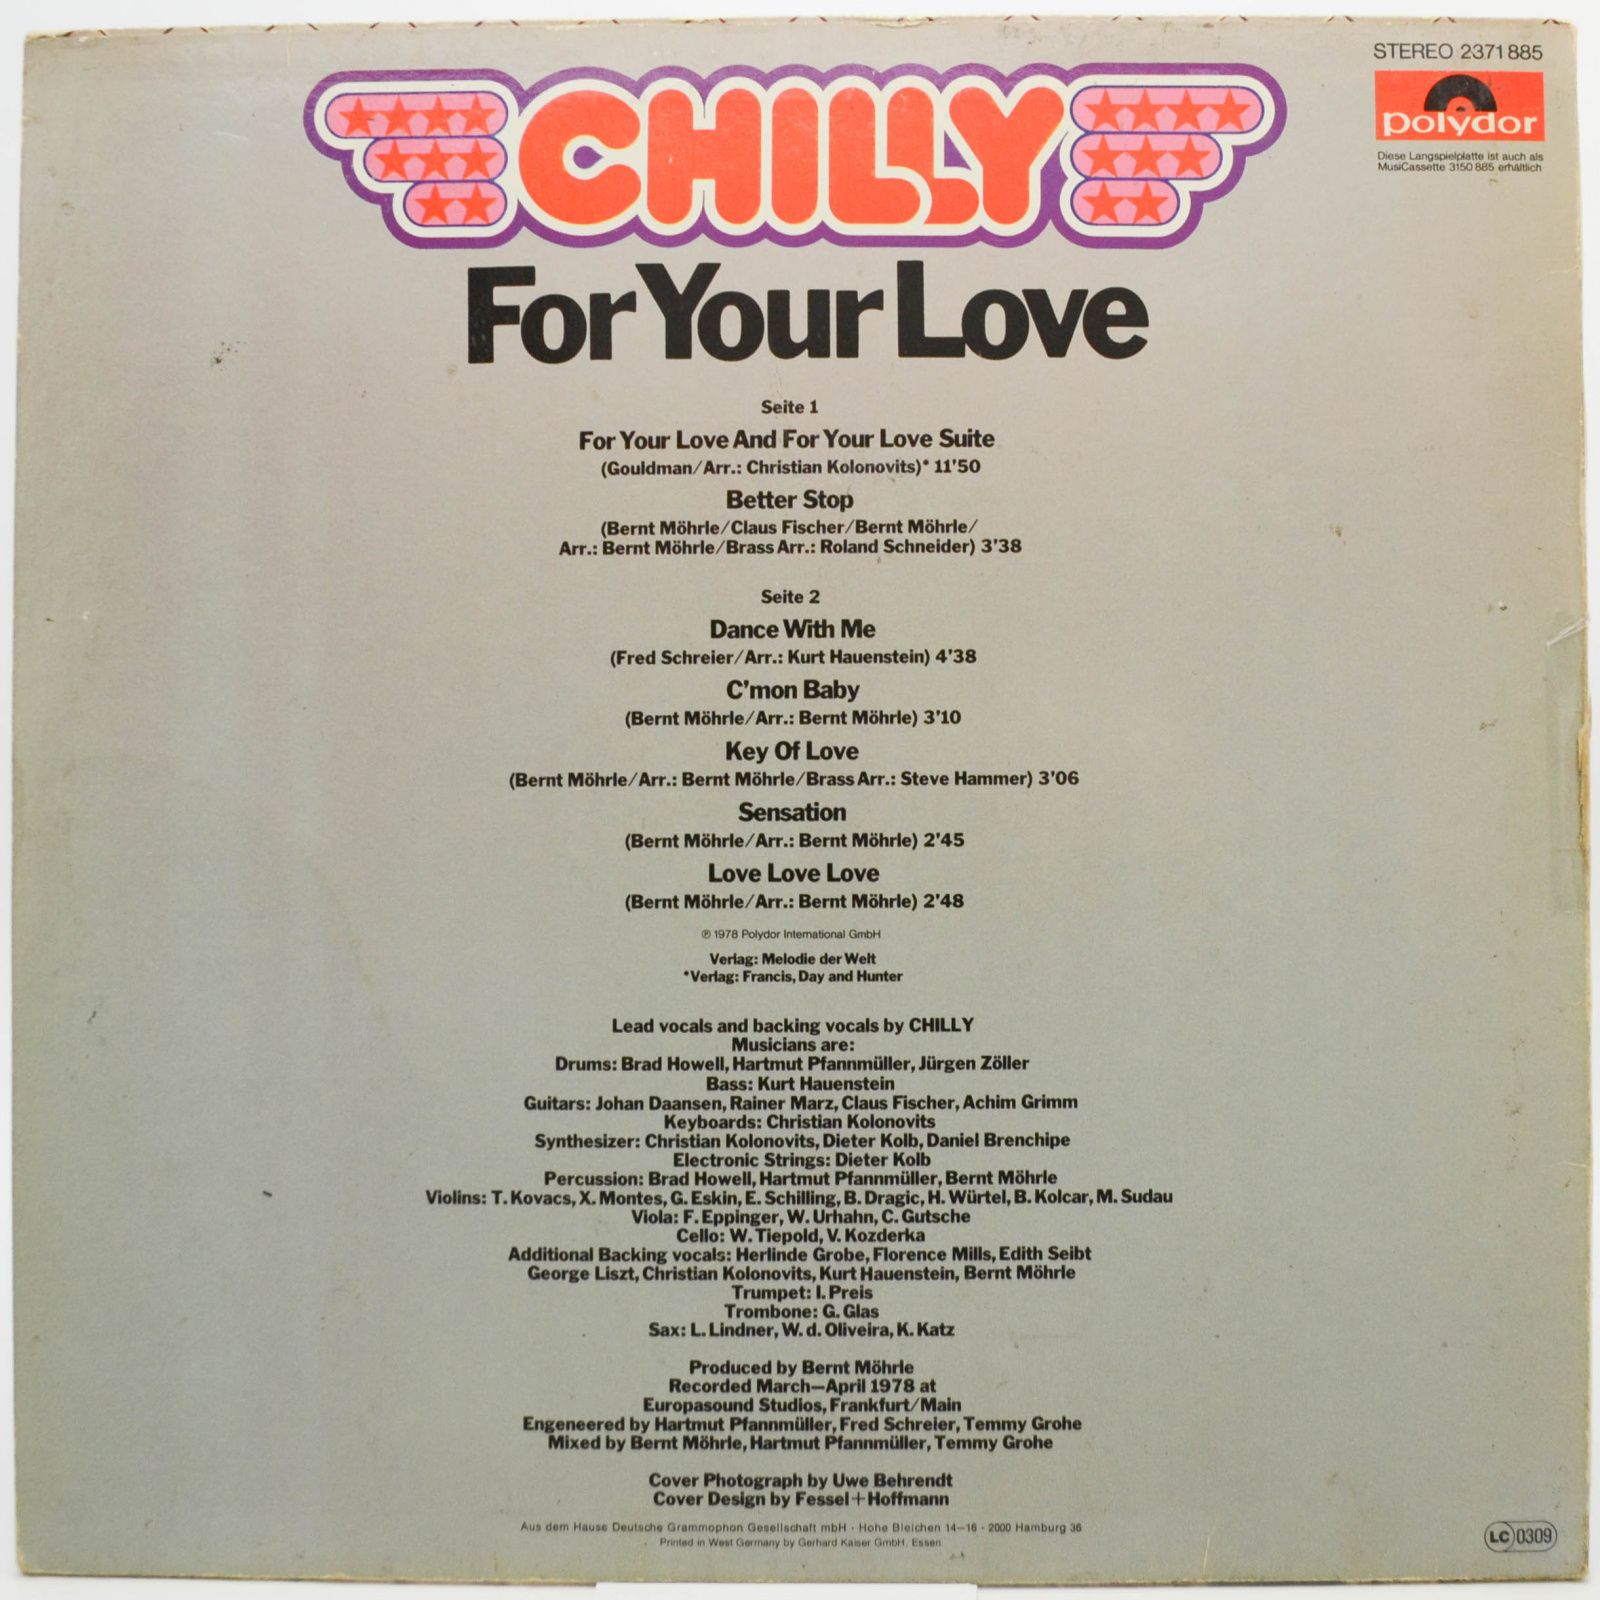 Chilly — For Your Love, 1978